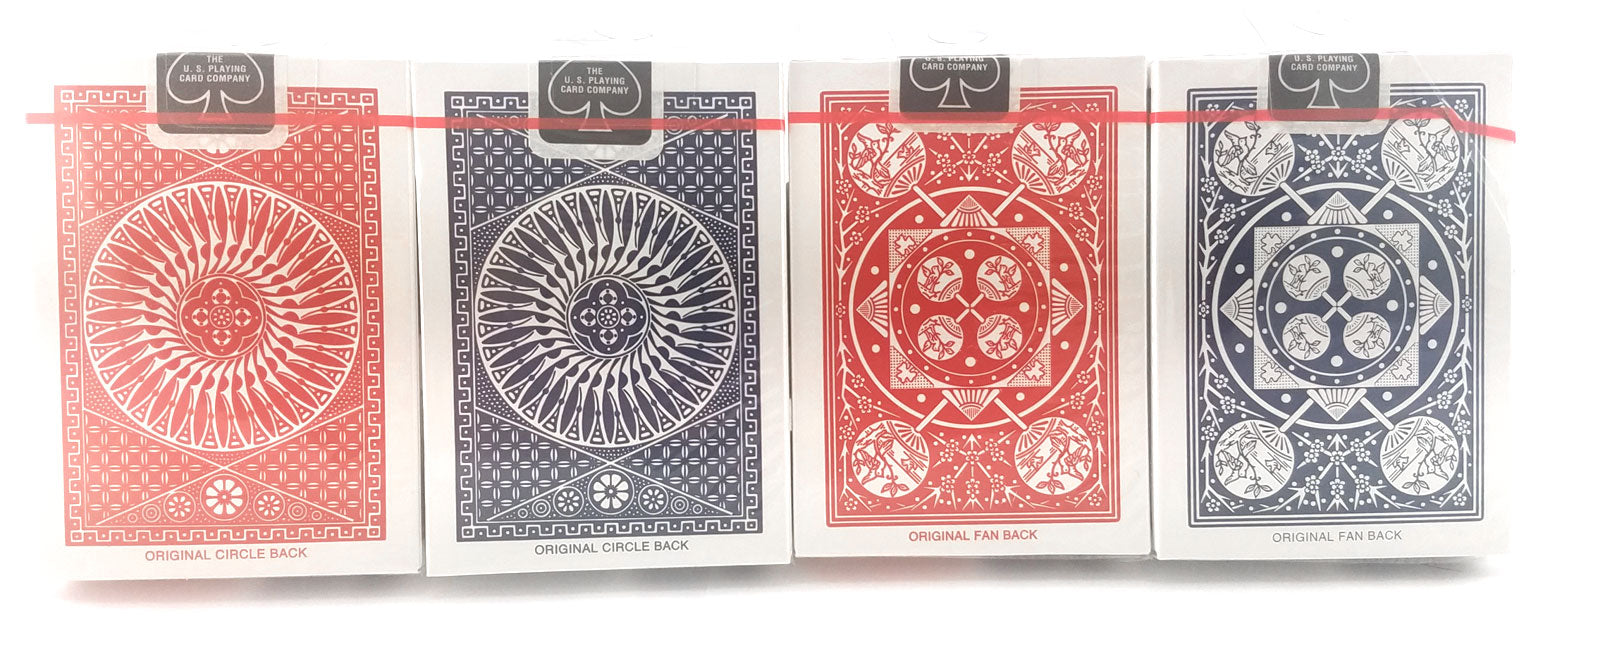 Tally-Ho, Fan Circle Back Style, Playing Cards - 1 Sealed Red Deck